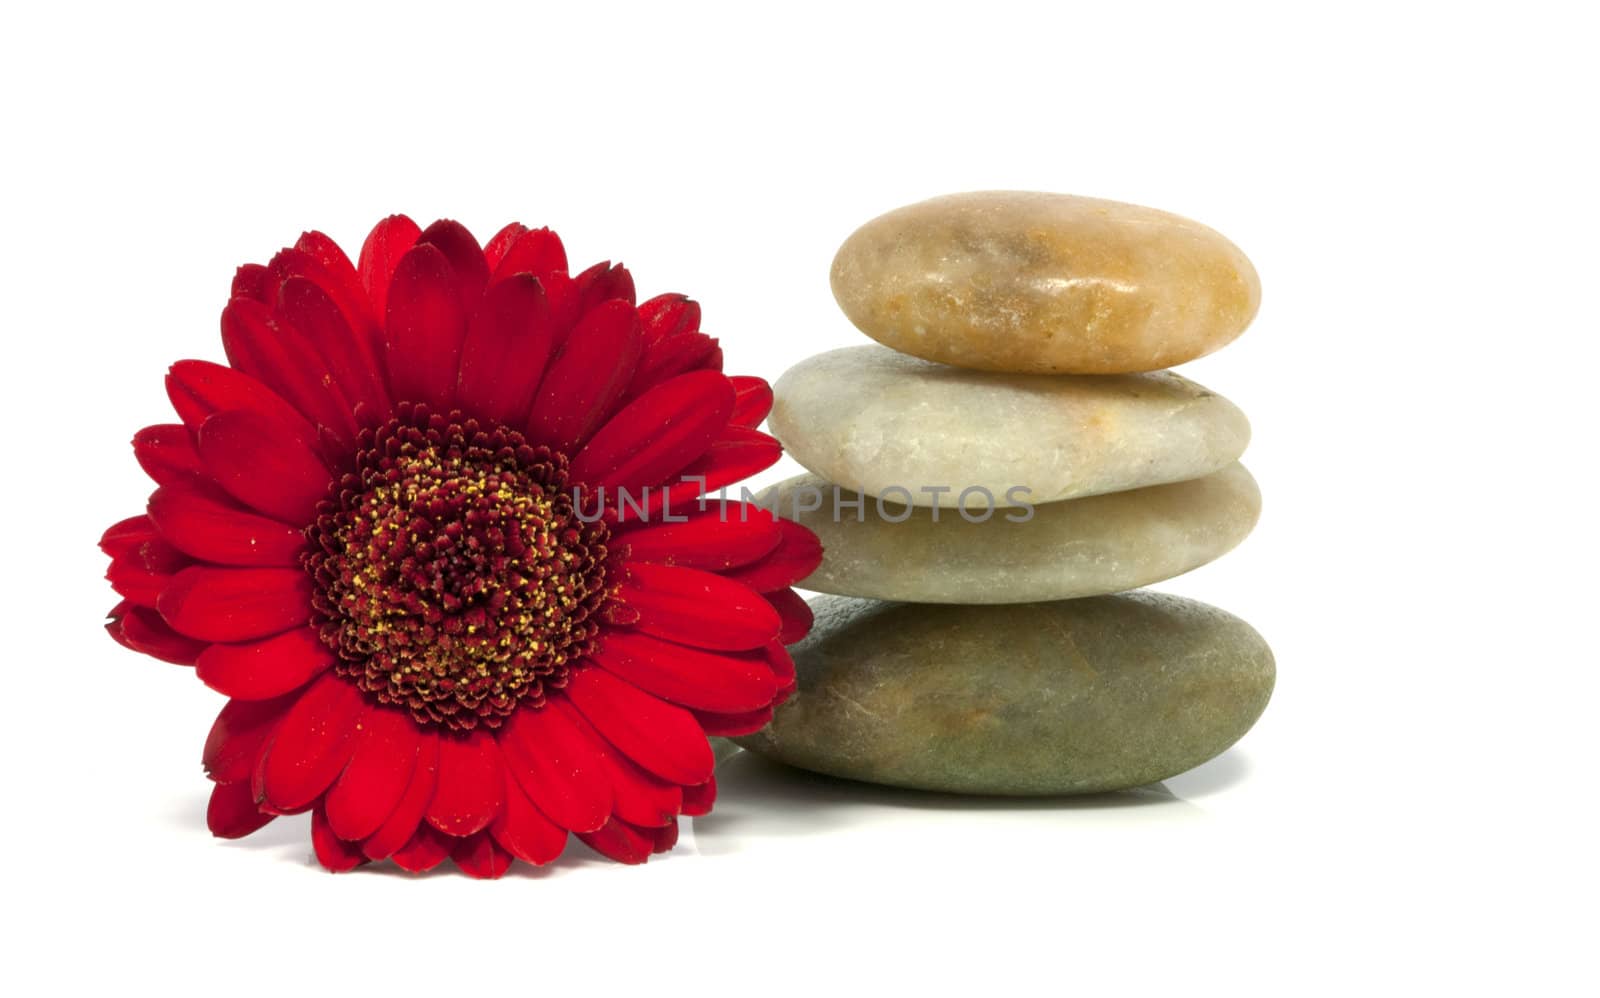 rocks with red flower by compuinfoto